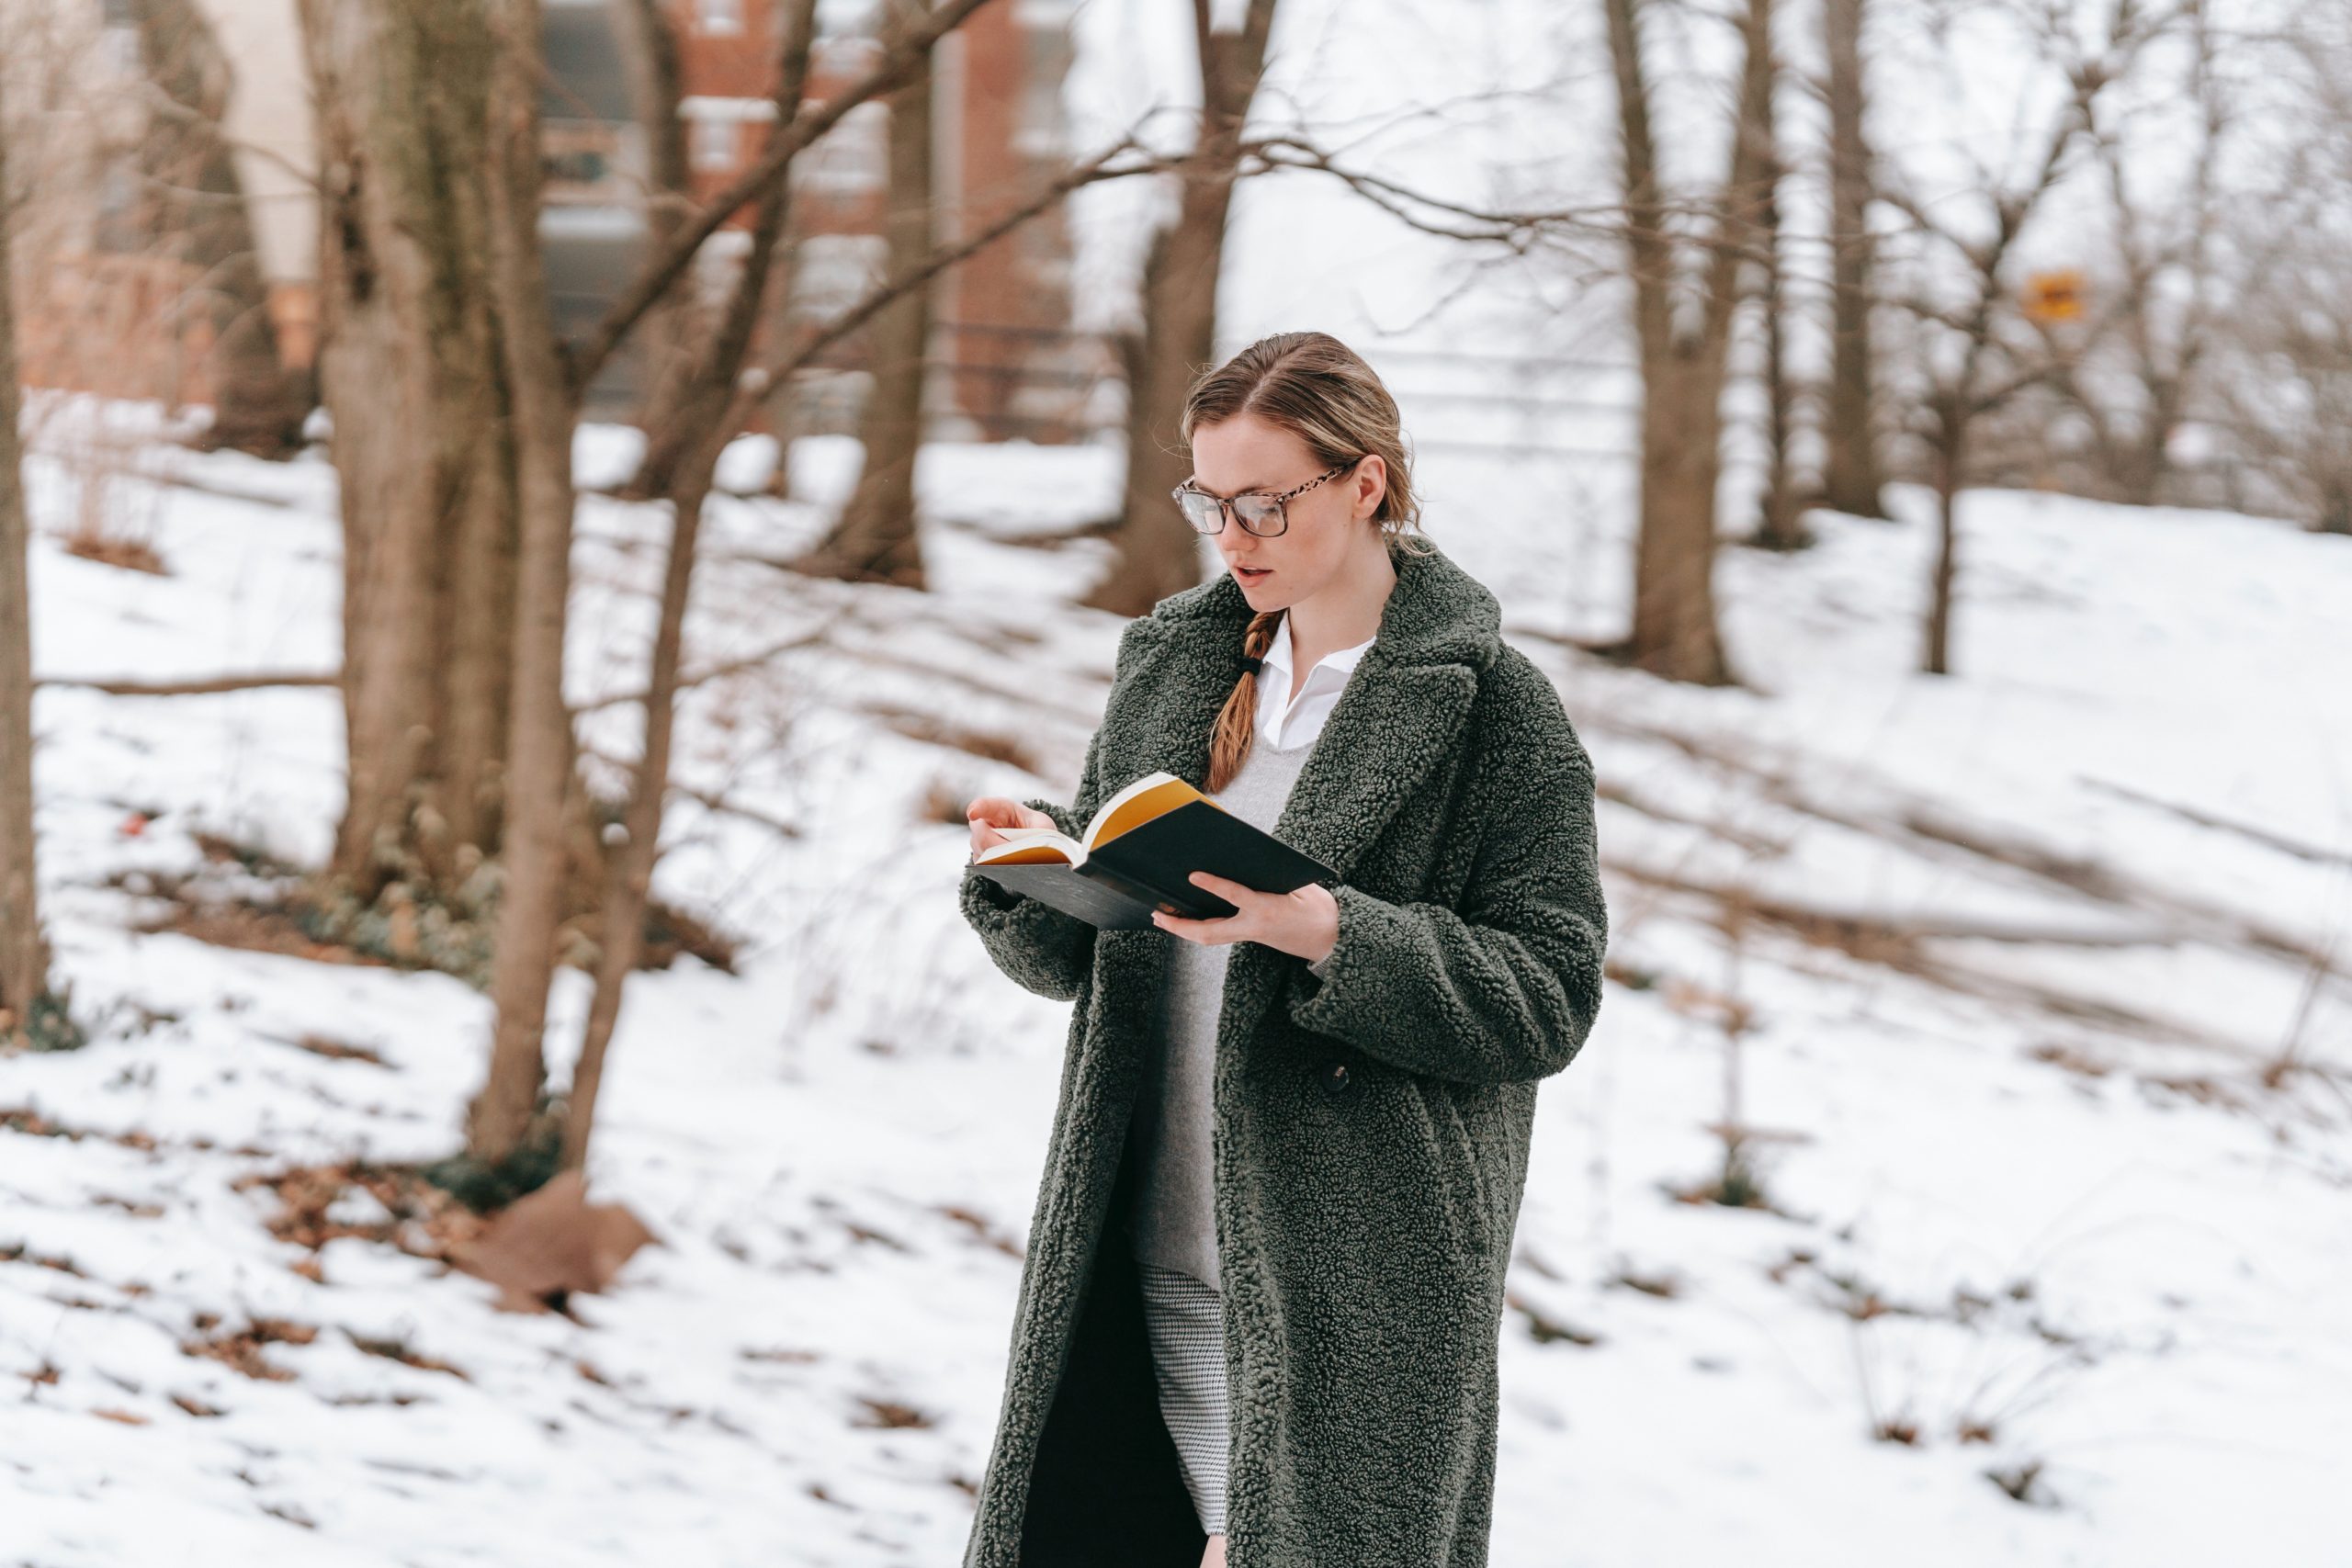 A woman standing in a snow-covered forest, reading a book.